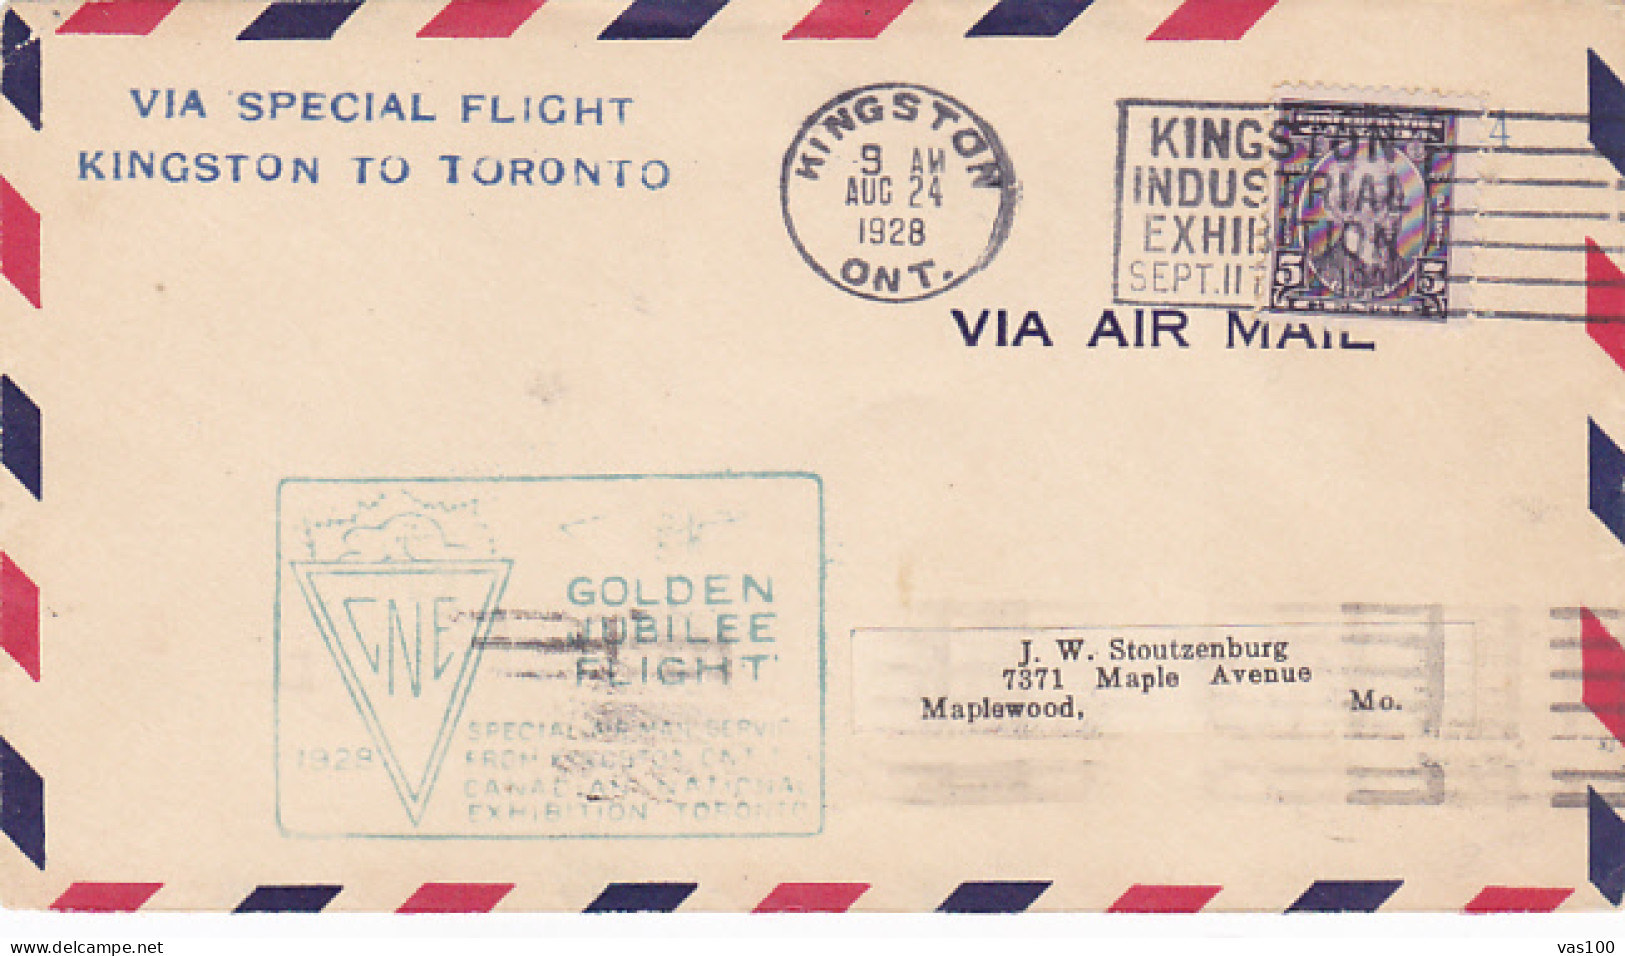 CNE GOLDEN JUBILEE FLIGHT, KINGSTON INDUSTRIAL EXHIBITION POSTMARKS, SIR LAURIER, STAMP ON COVER, 1928, CANADA - Storia Postale